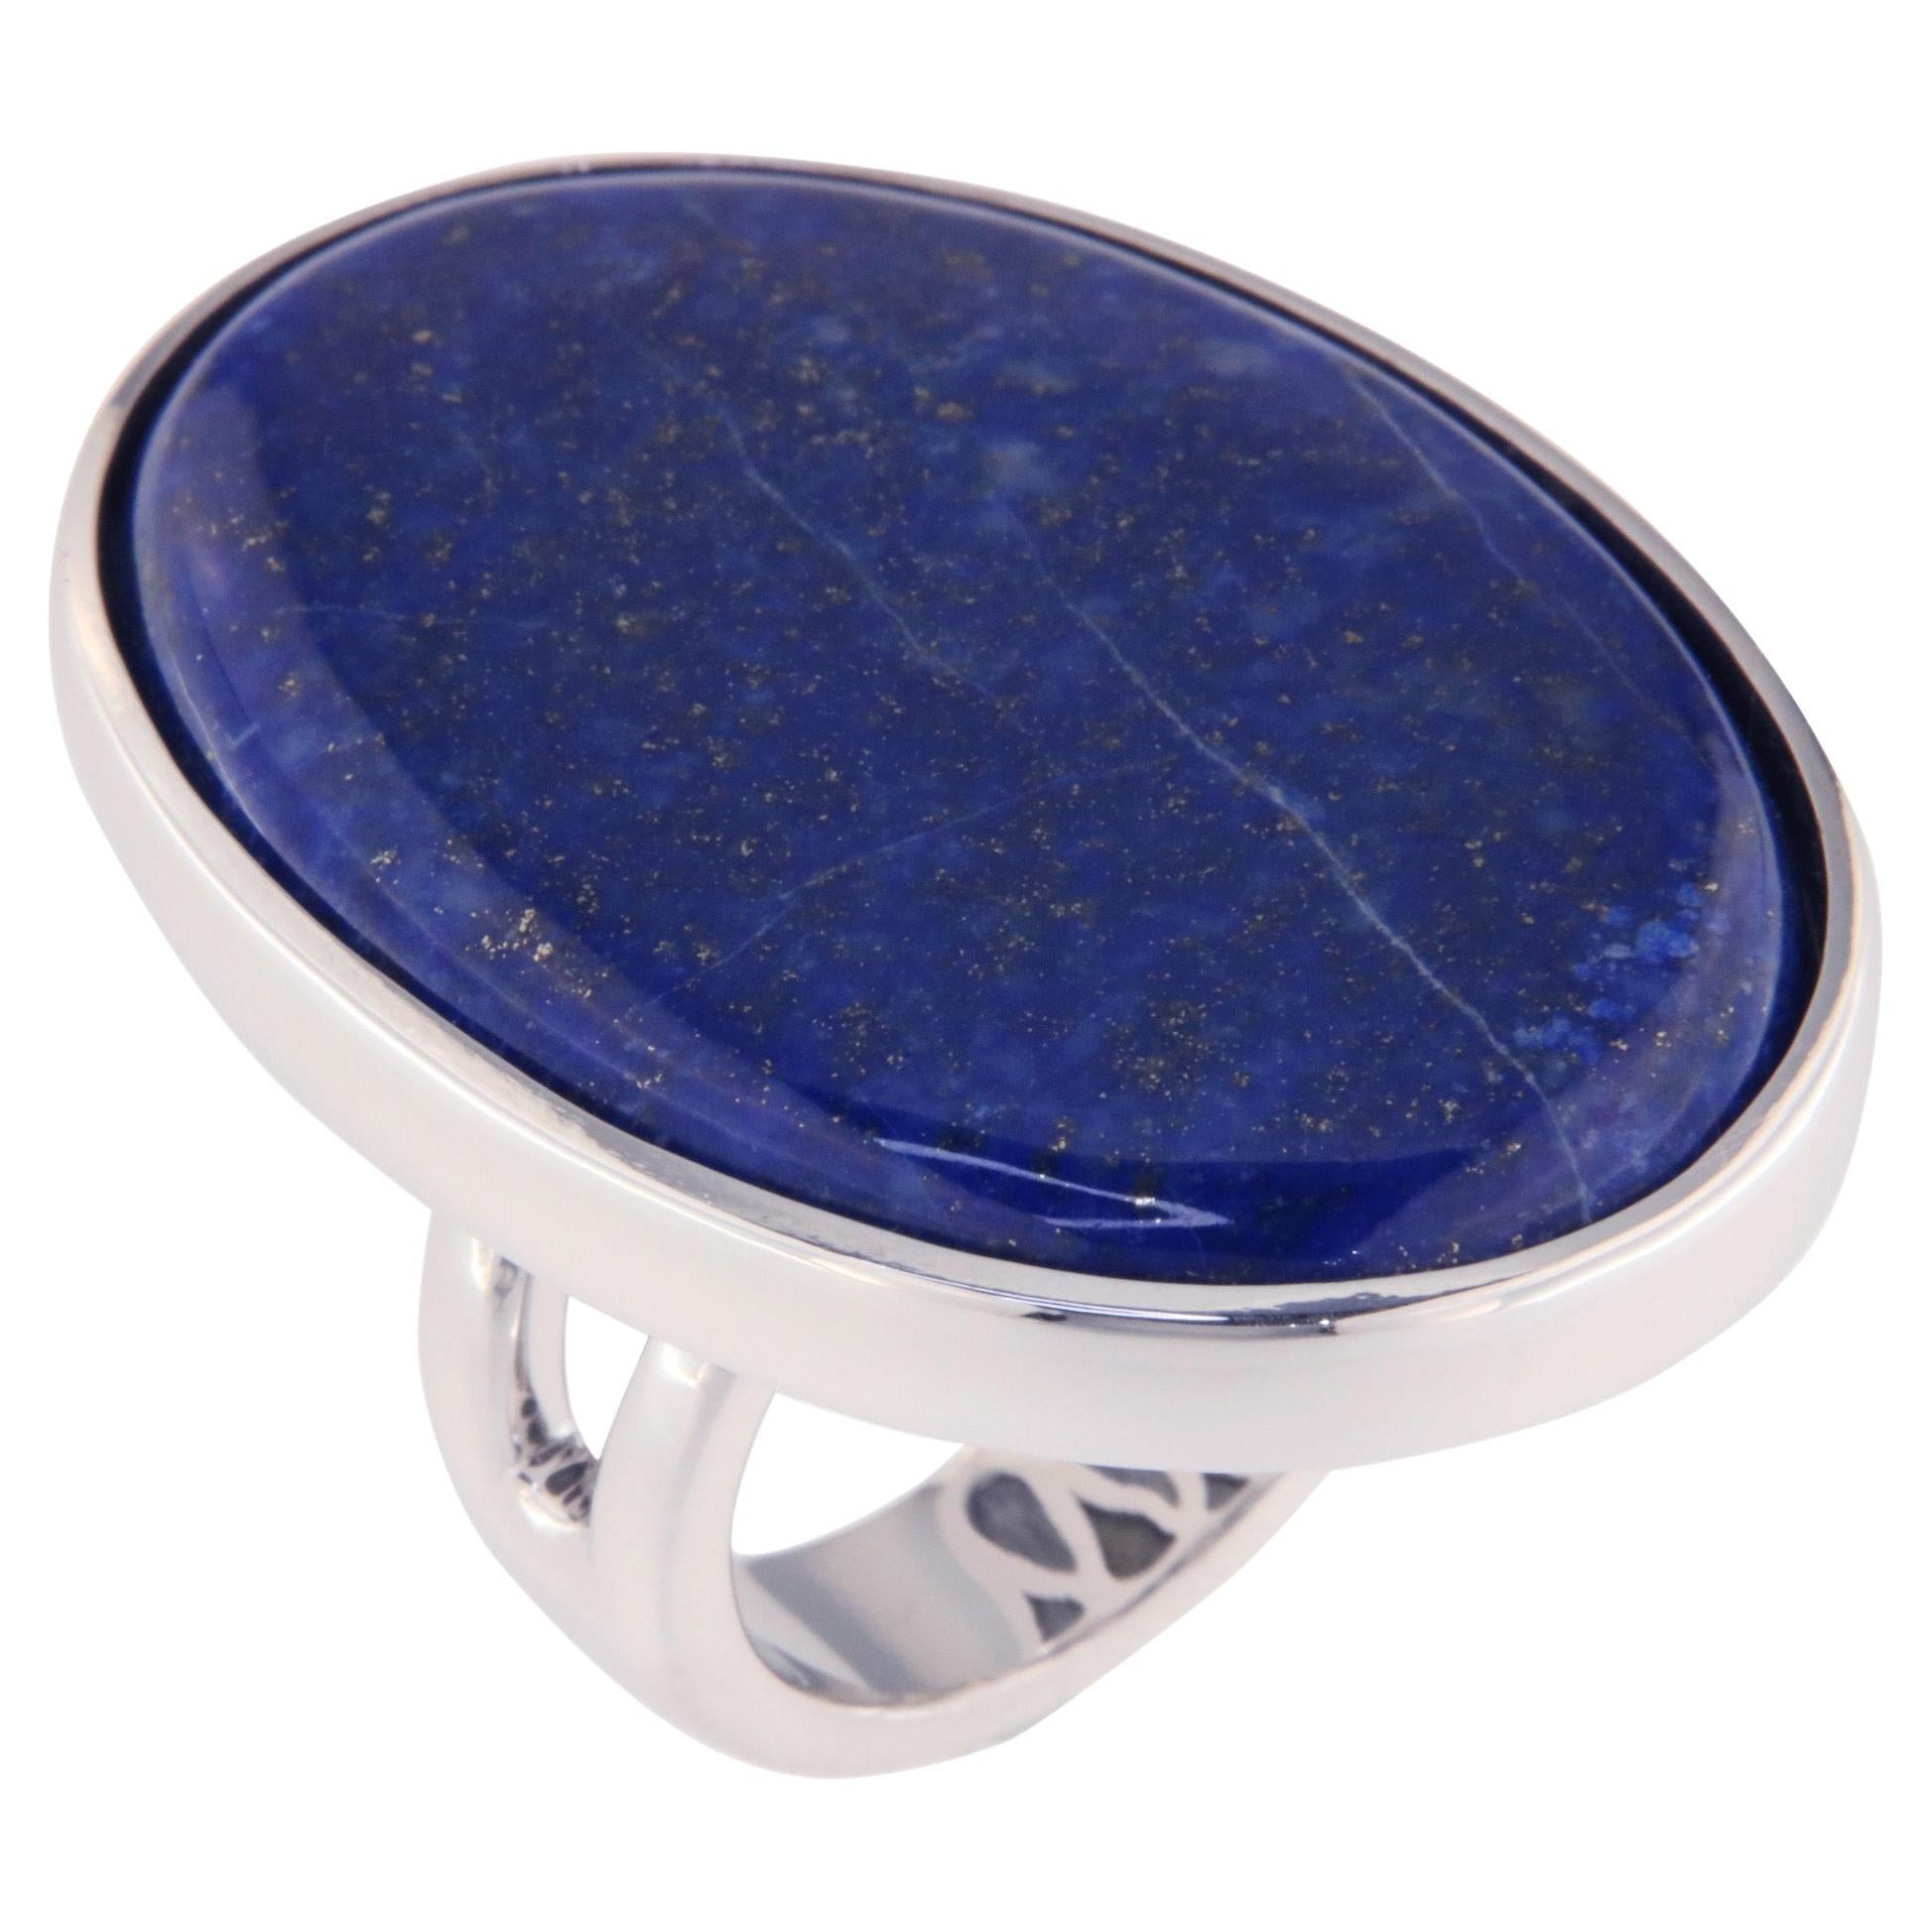 Orloff of Denmark, Gorgeous 78 carat Lapis Lazuli Ring in 925 Sterling Silver For Sale